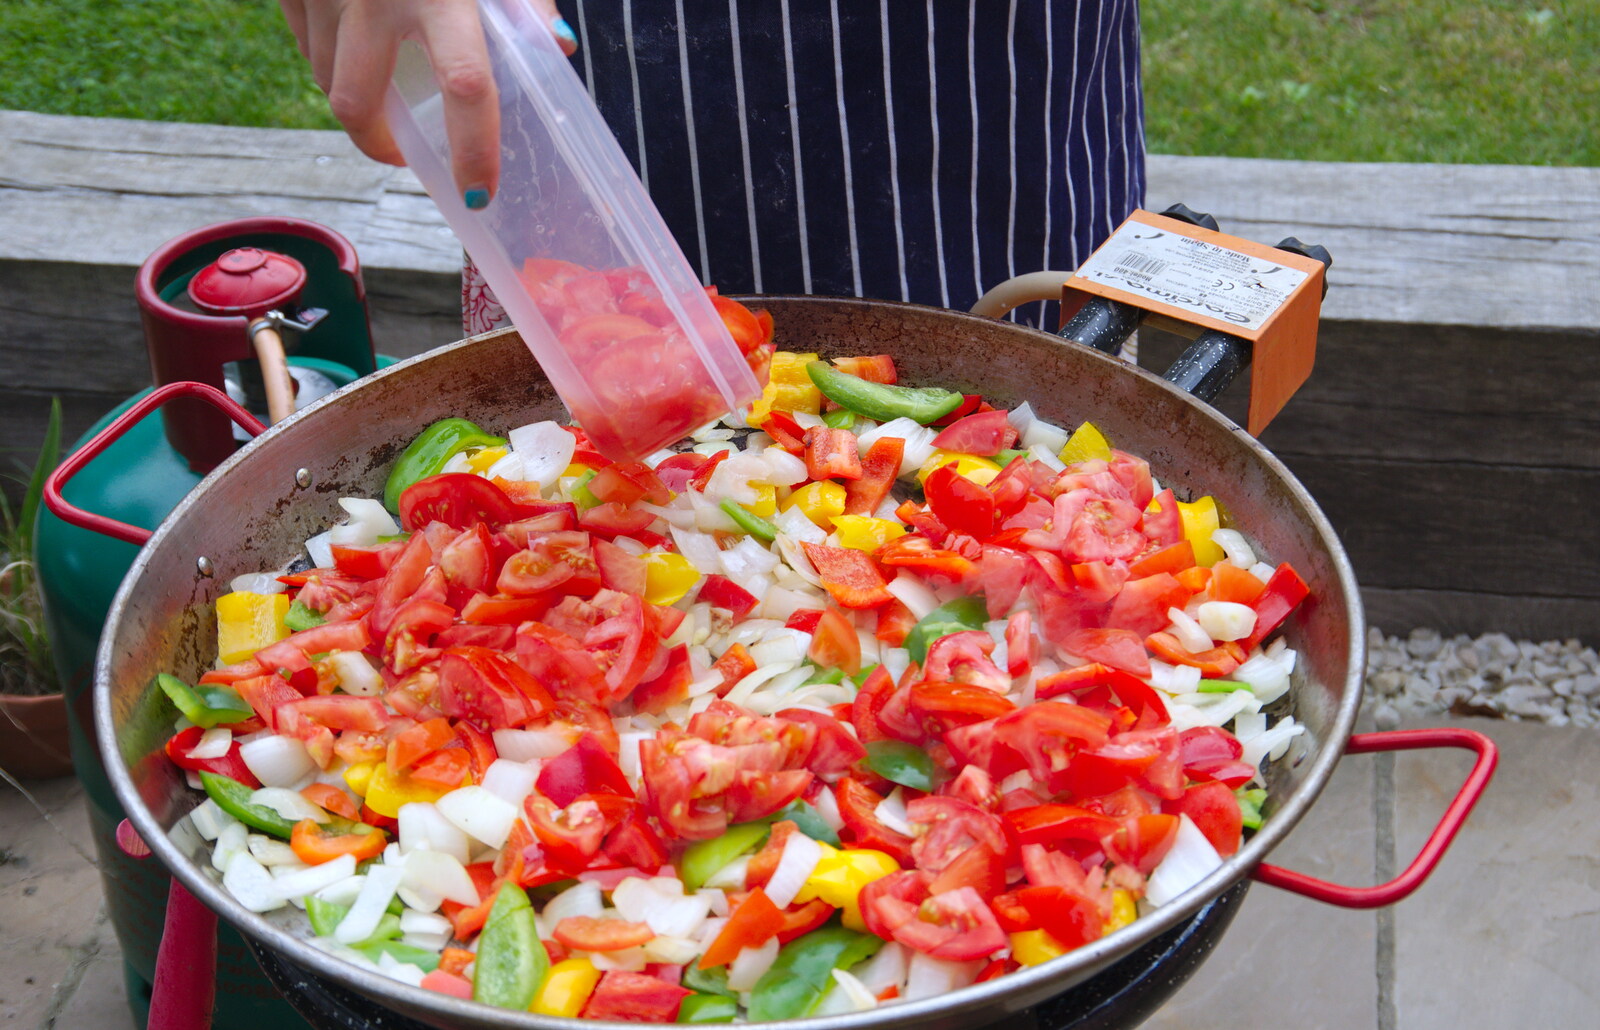 Isobel adds tomatoes to the paella from A Summer Party, Brome, Suffolk - 3rd August 2019